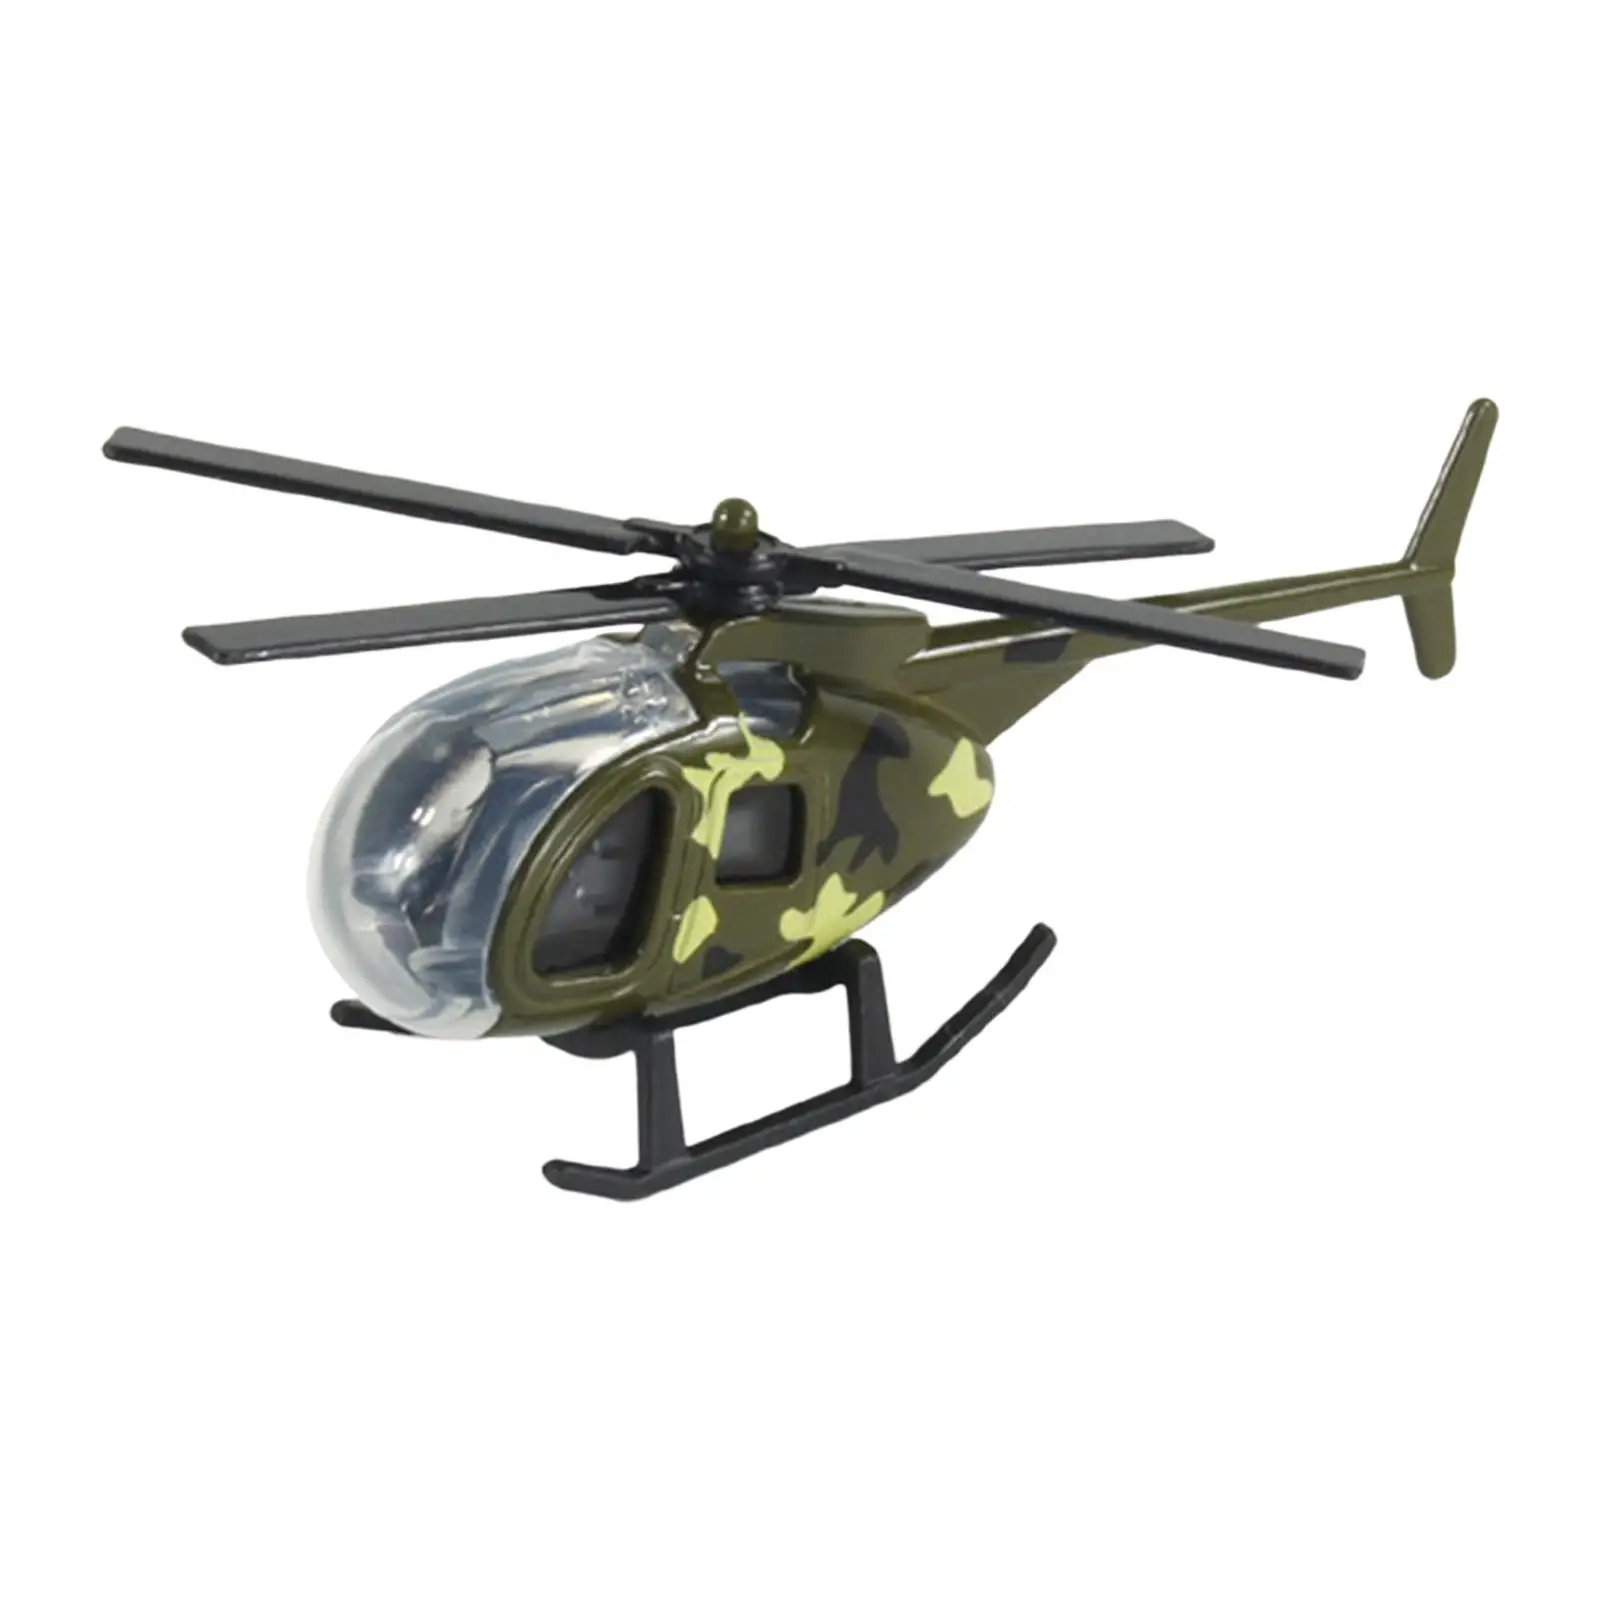 Small Diecast Alloy Helicopter Ornament Cake Decoration Holiday Present Desktop Display for Kids Adults Birthday Gift Plane Toy